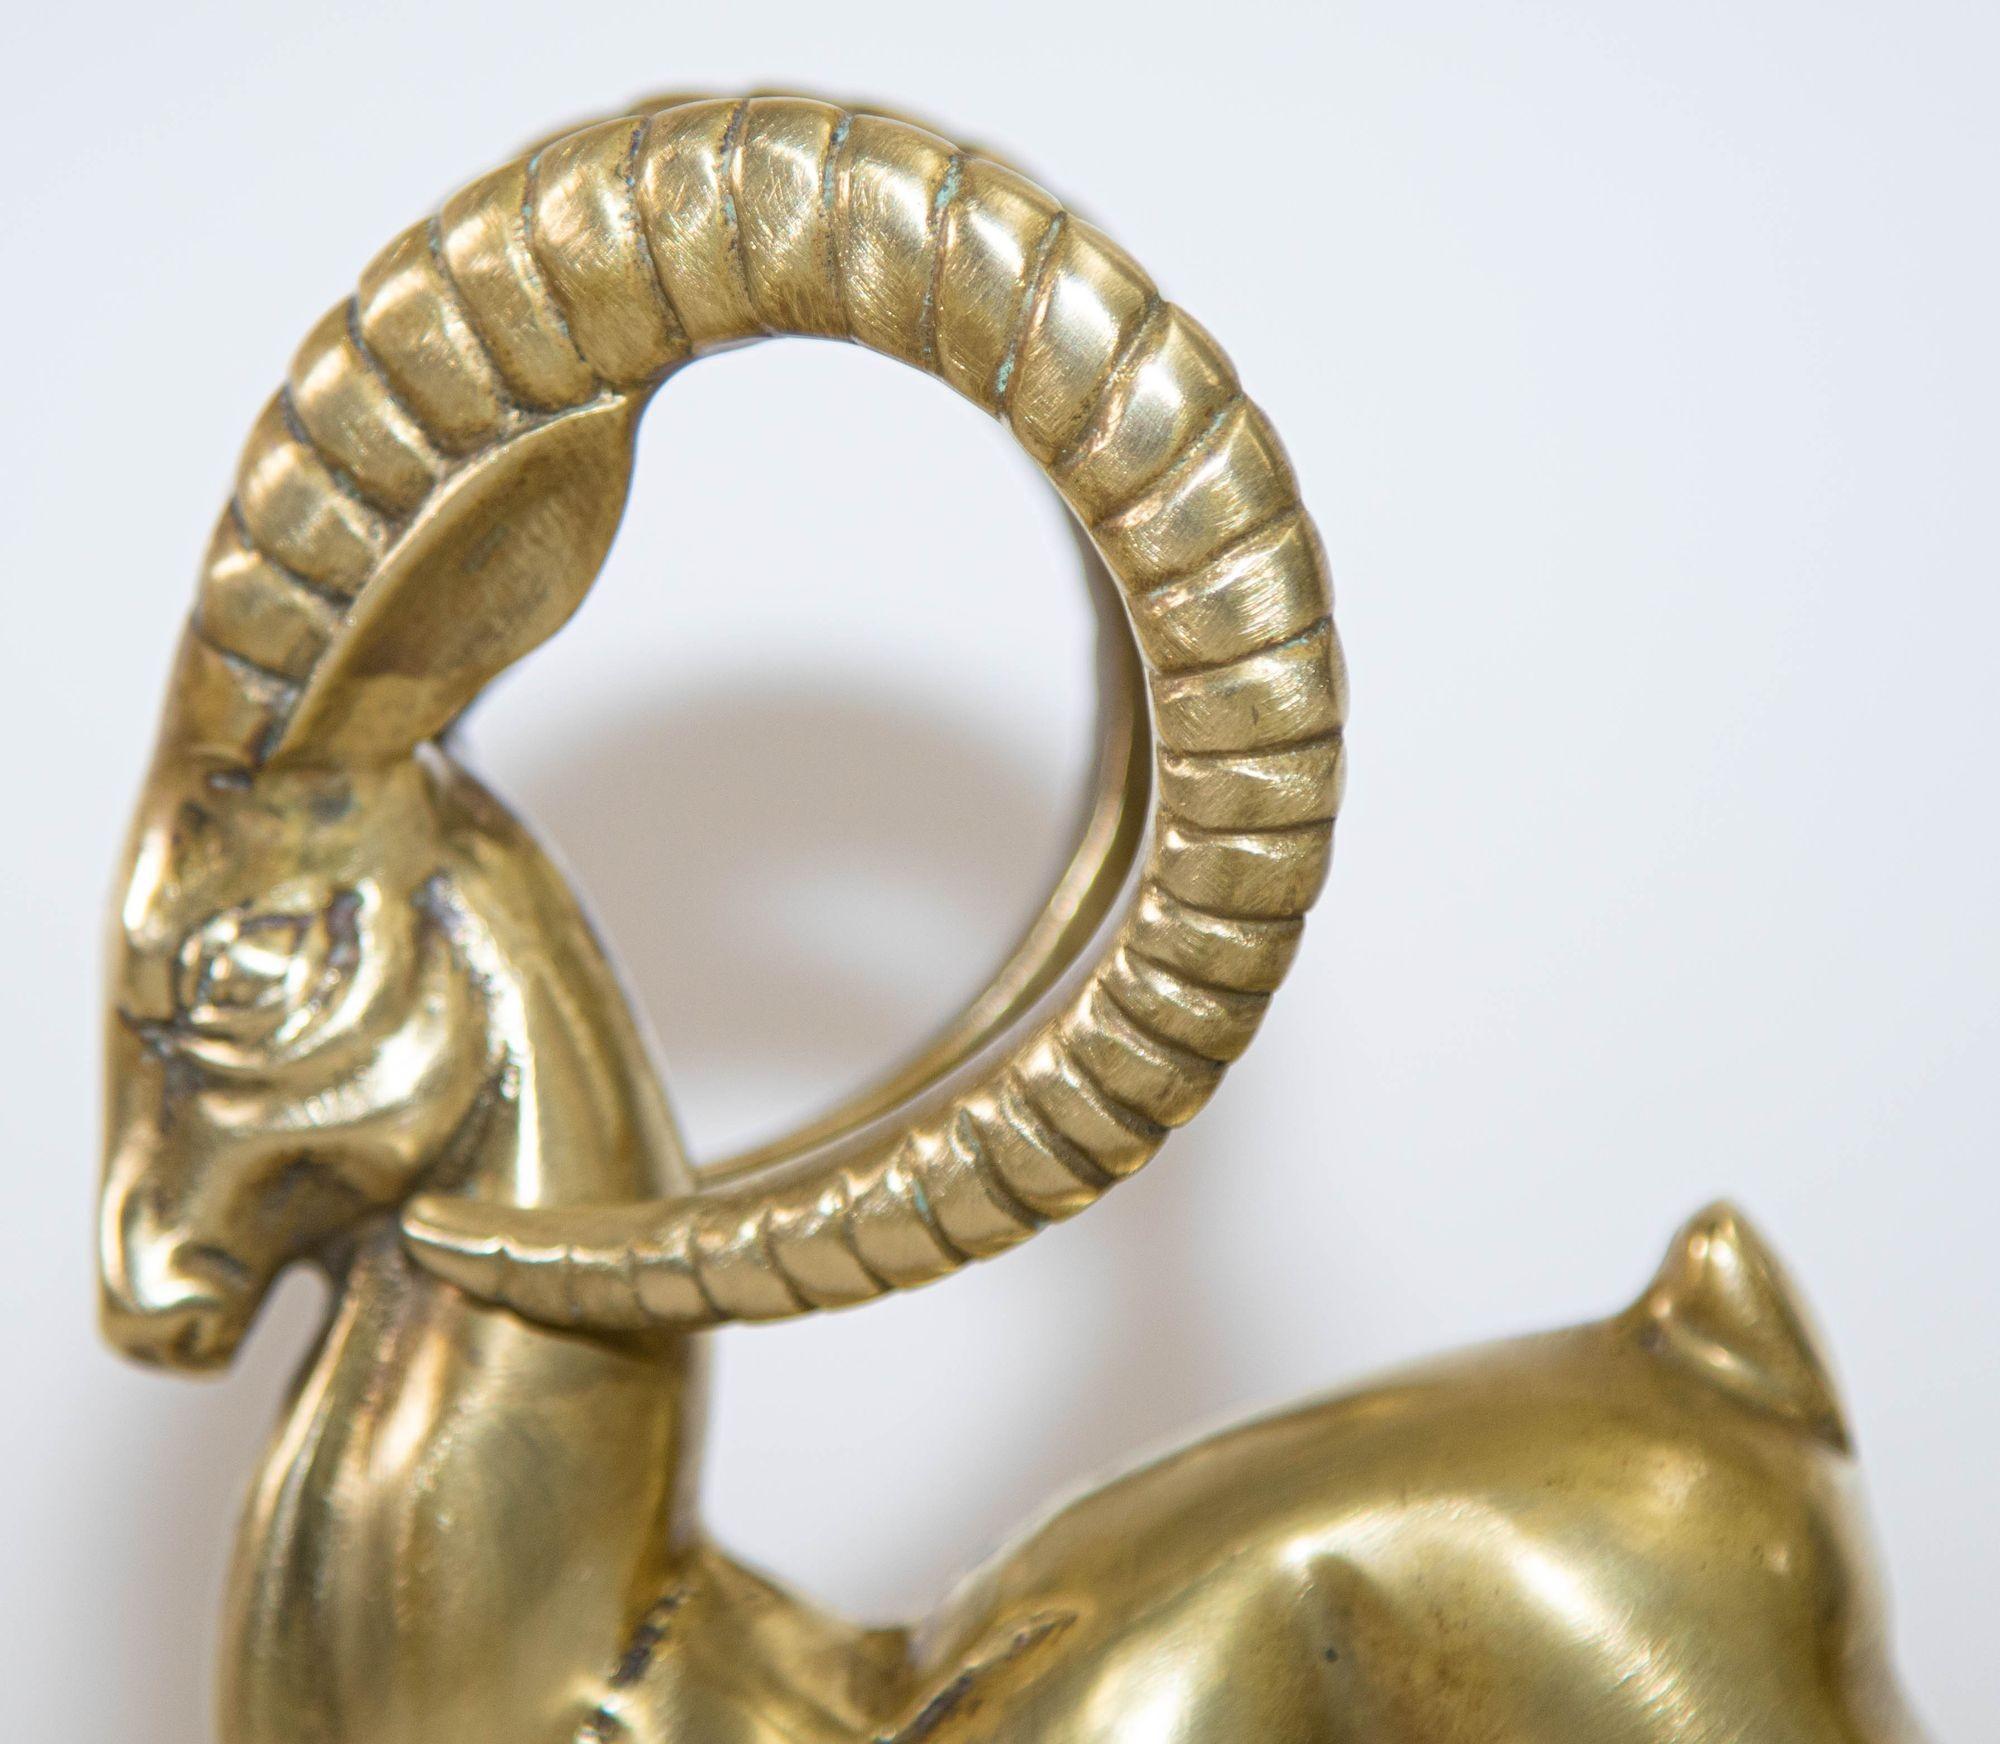 Vintage French Art Deco Style Sculpture of Brass Ibex Antelope.
Beautiful elegant art Deco Hollywood Regency style cast brass ram, gazelle antelope sculpture mounted on a brass base plate.
Antelopes are a symbol of speed, grace wild beauty is